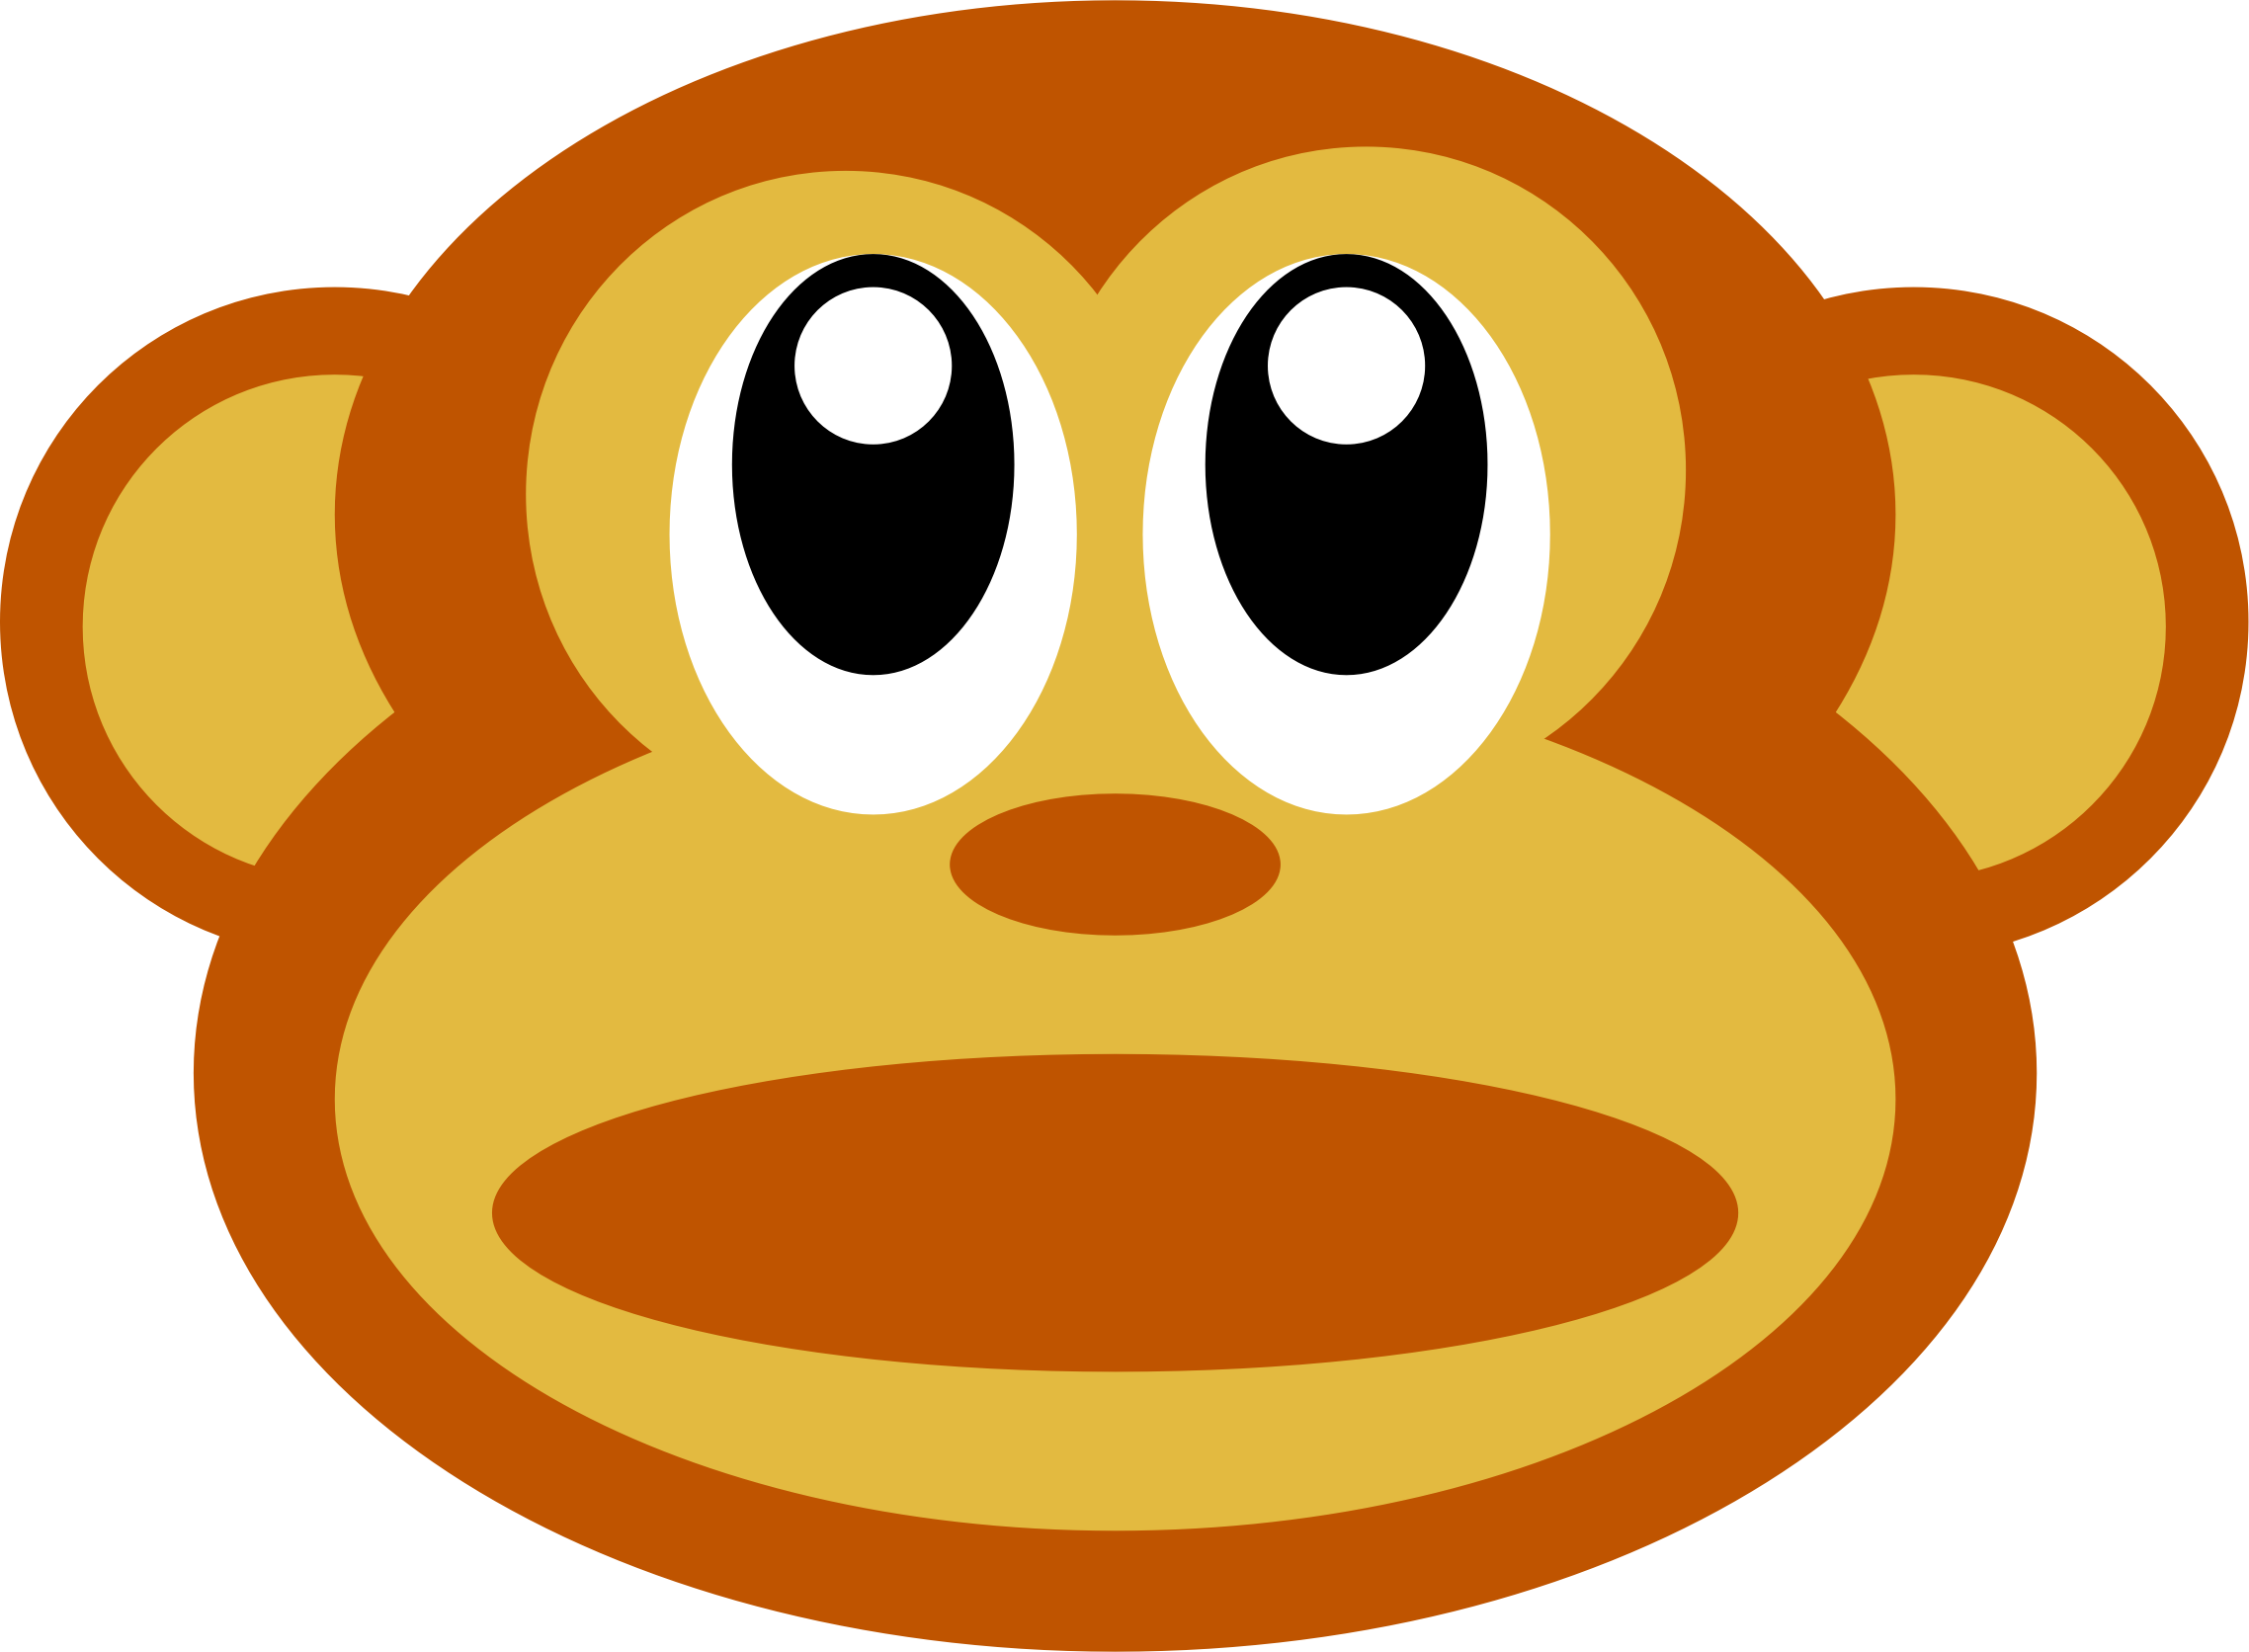 Monkey Face Clipart #1. BIG IMAGE (PNG)